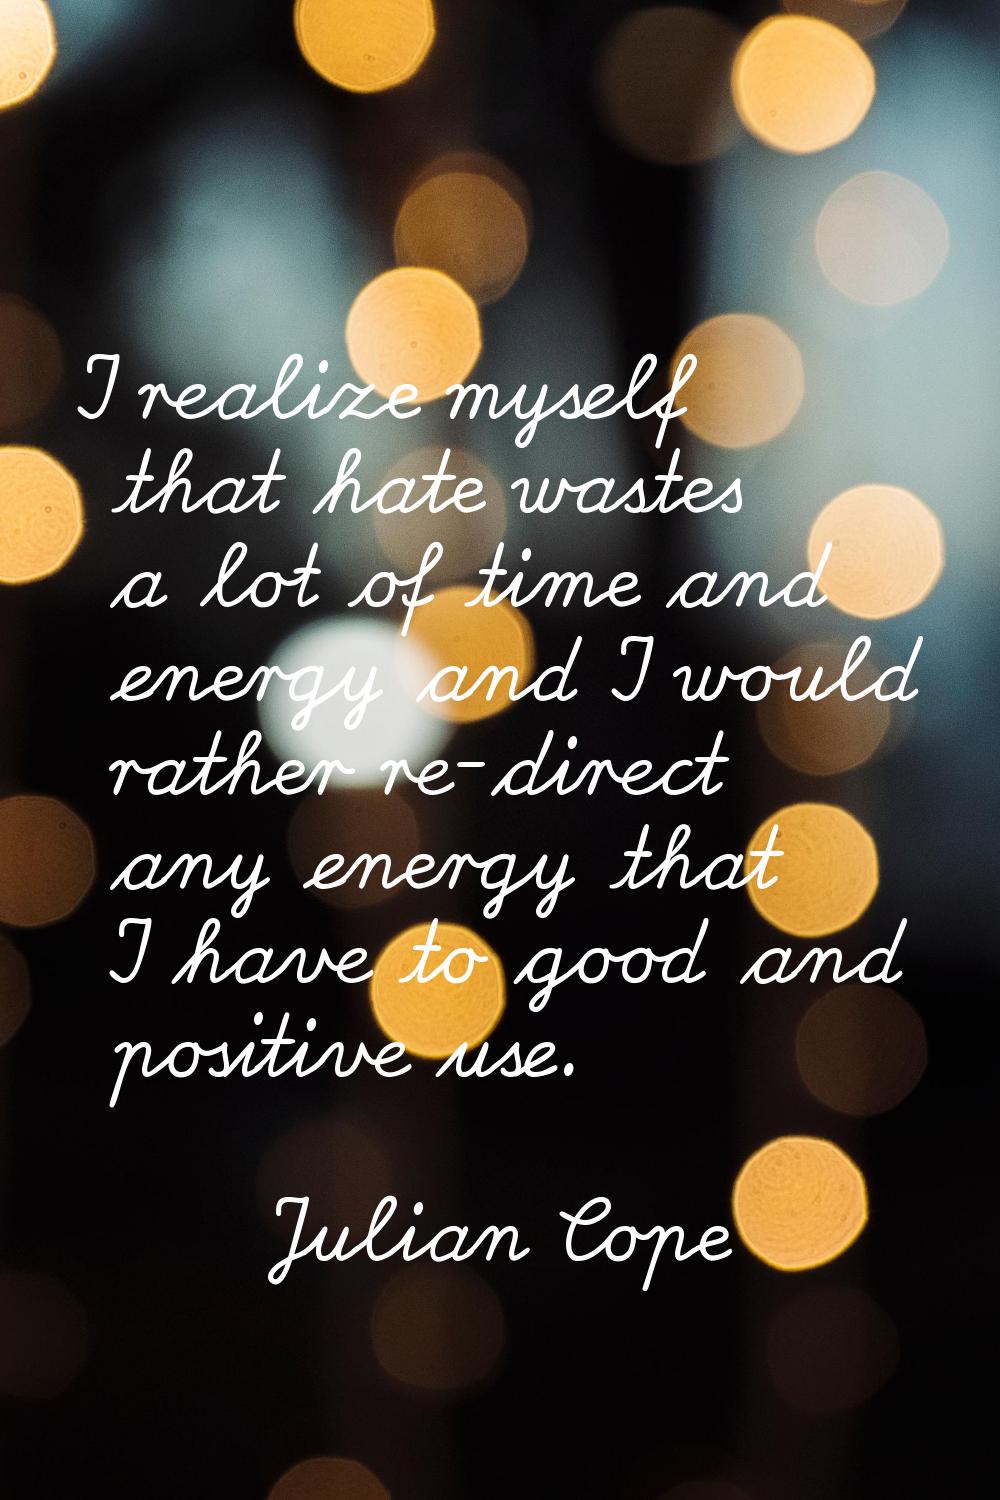 I realize myself that hate wastes a lot of time and energy and I would rather re-direct any energy 